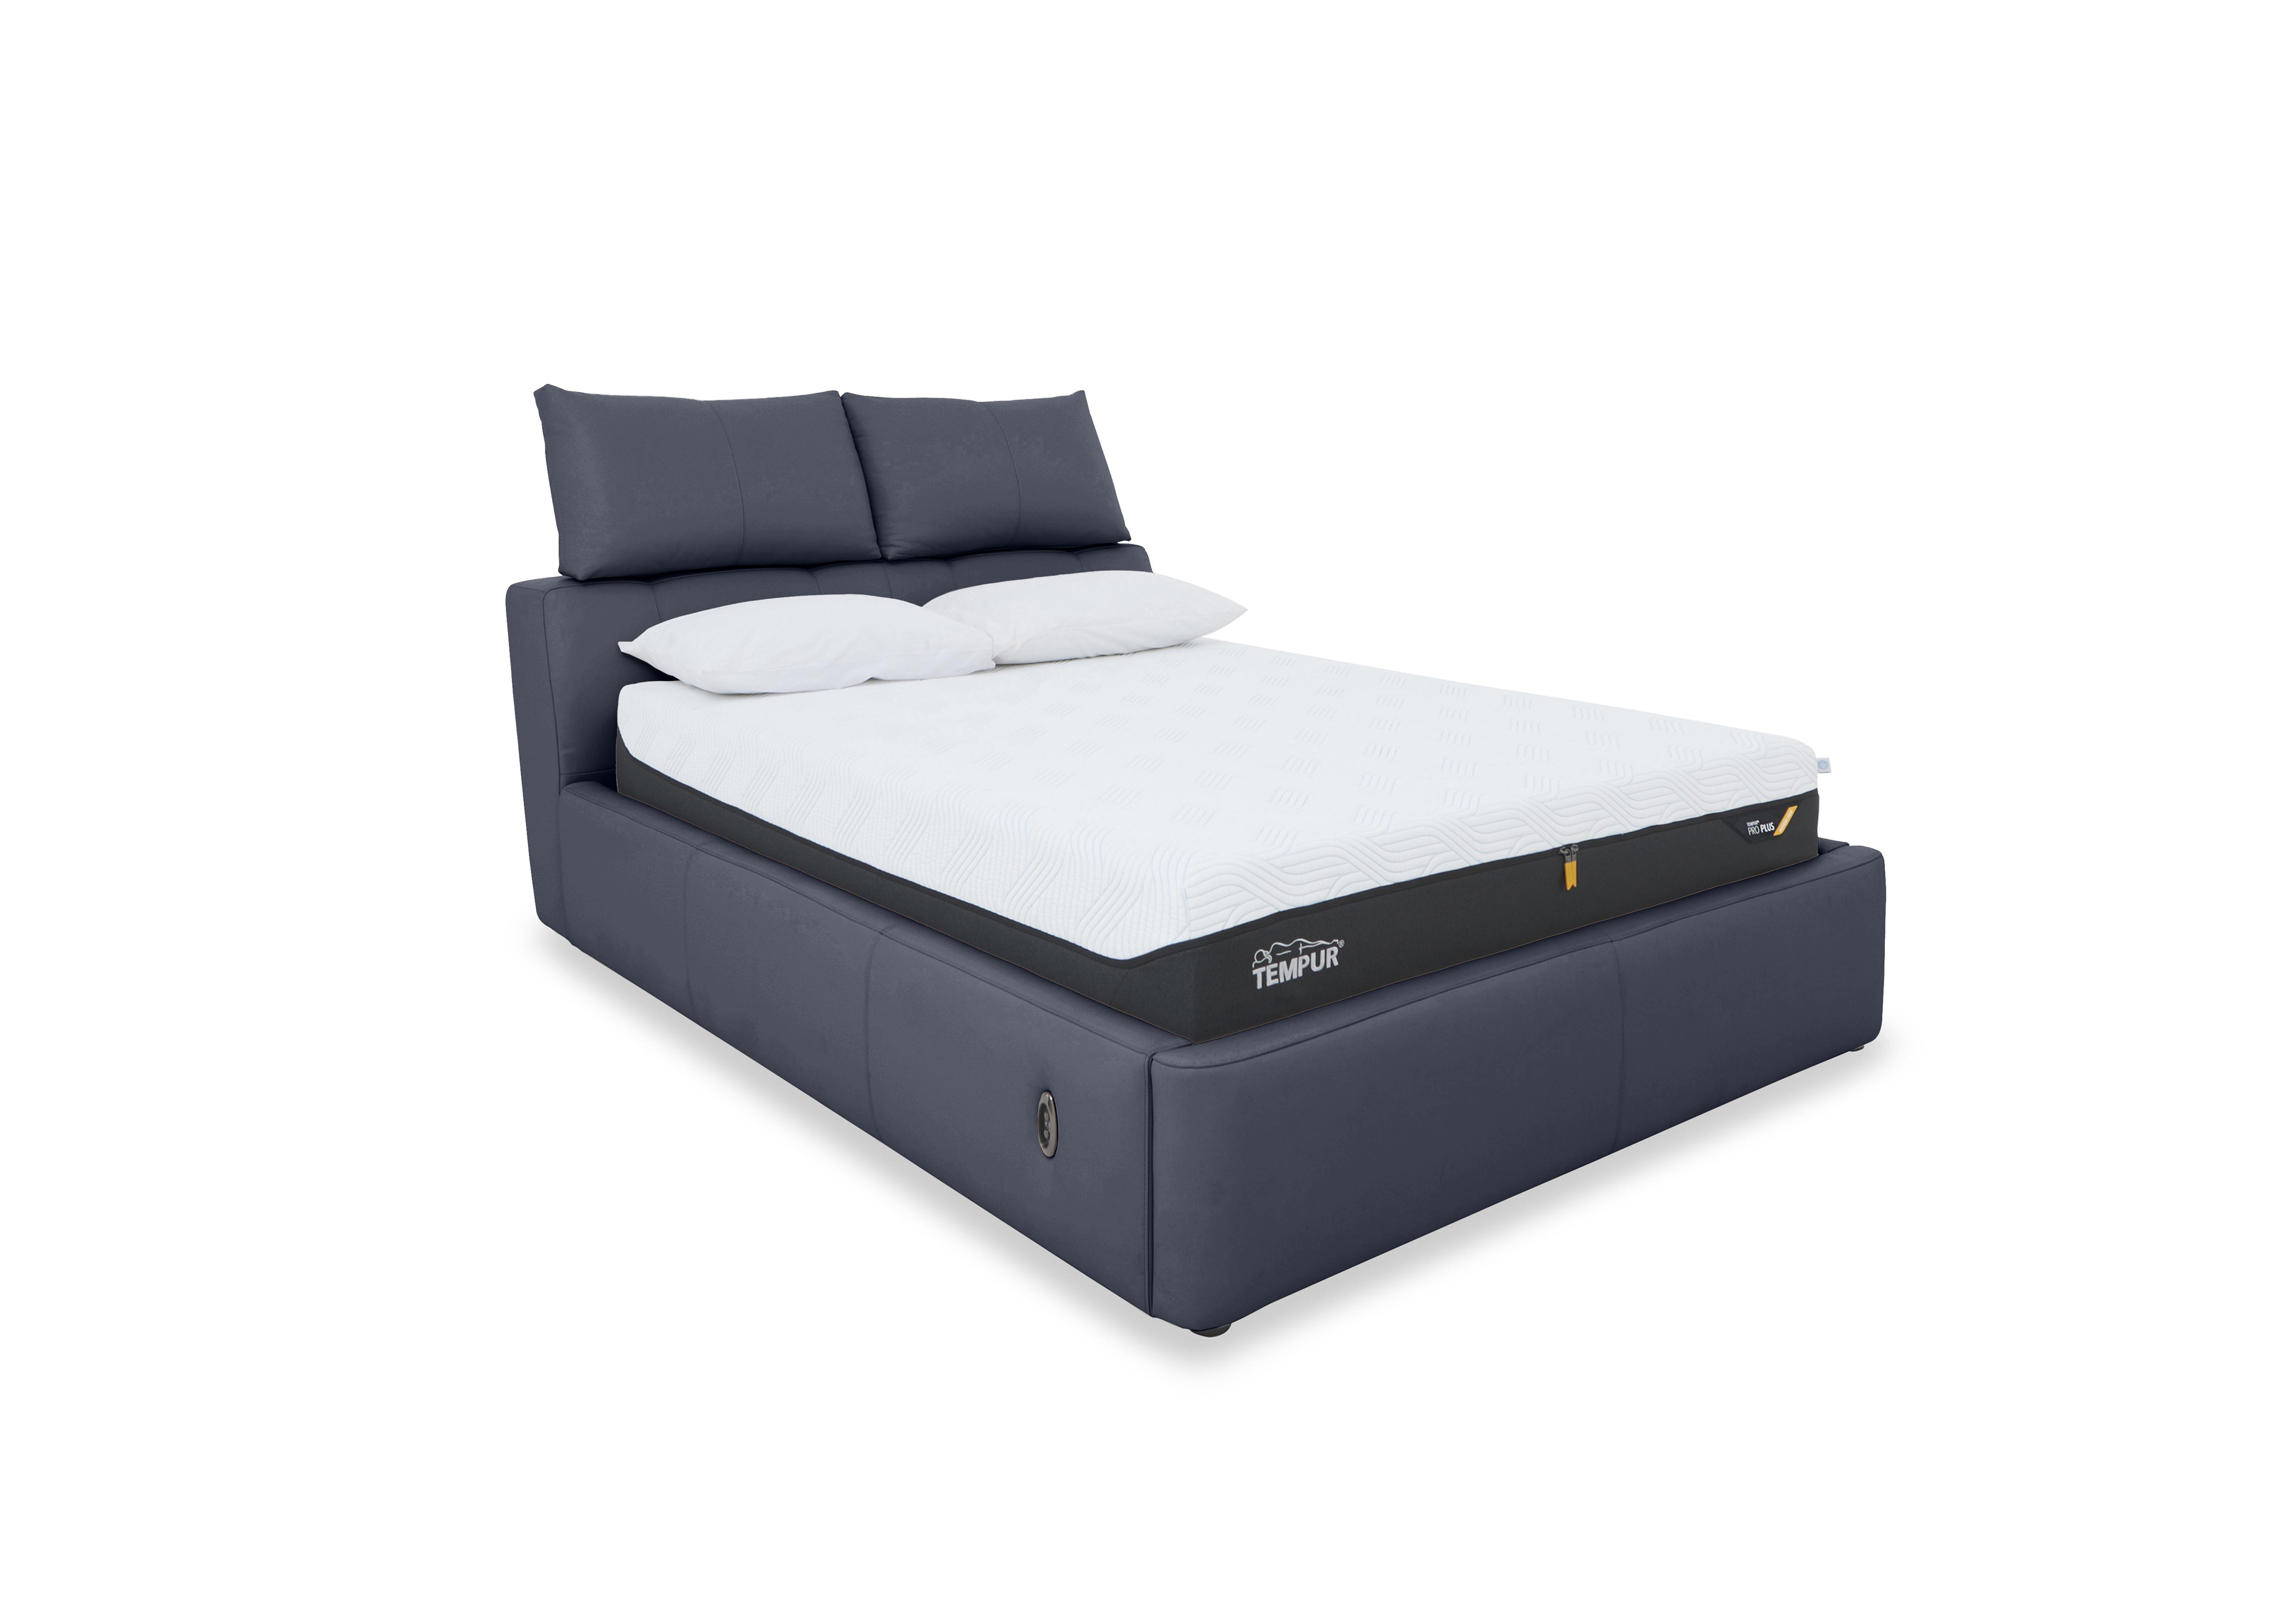 Tyrell Leather Electric Ottoman Bed Frame in Bv-313e Ocean Blue on Furniture Village